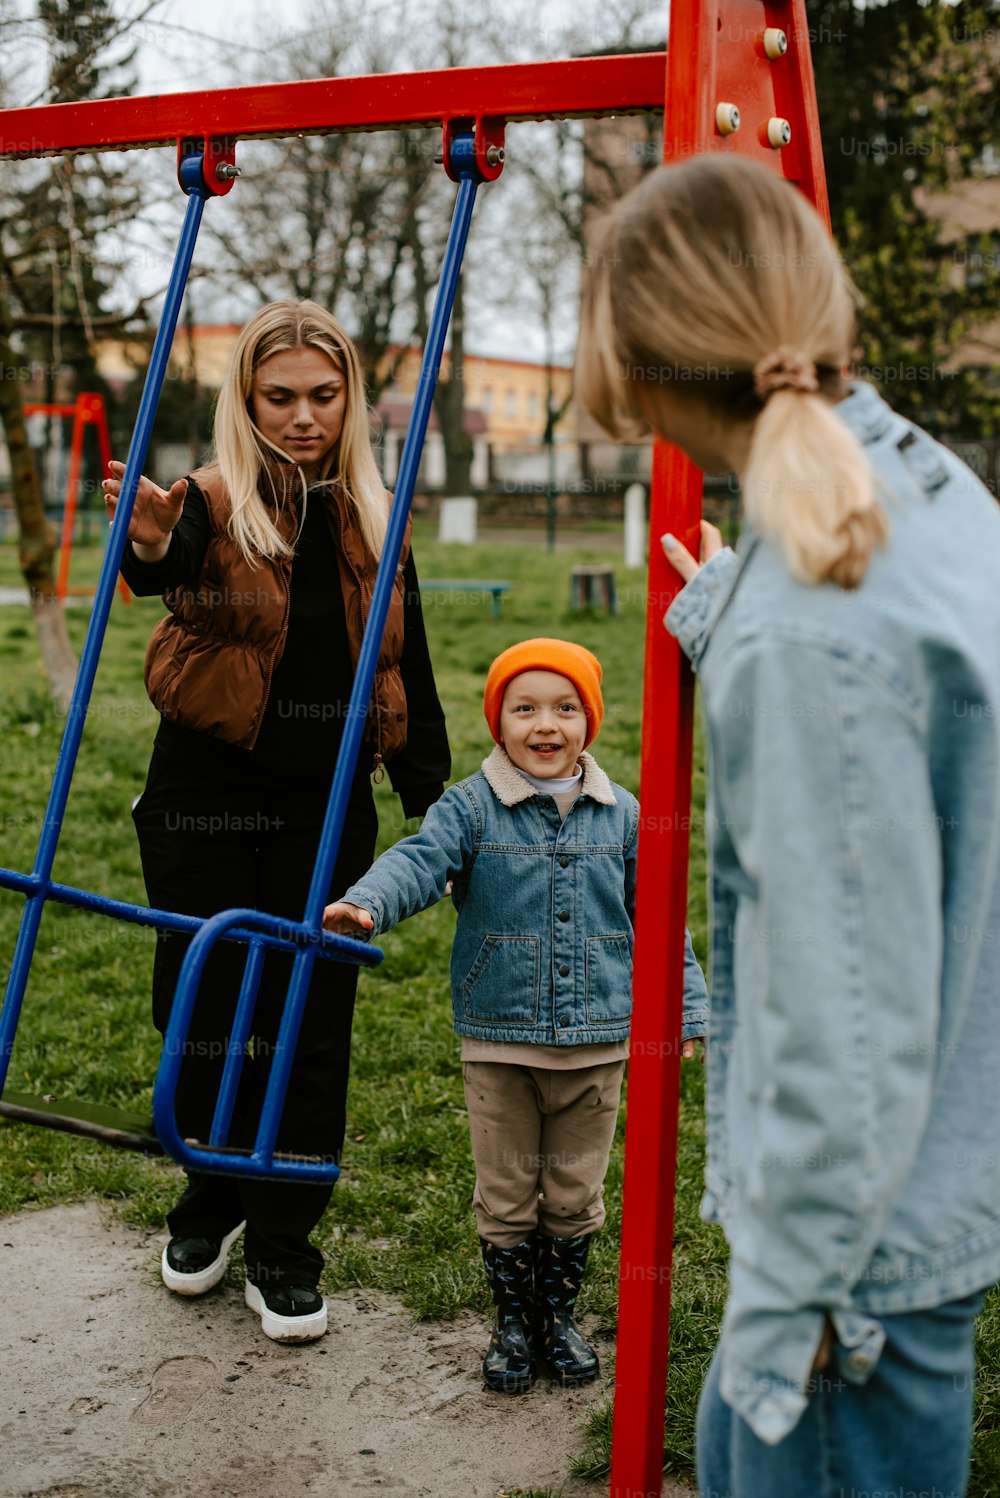 a woman and a child playing on a swing set